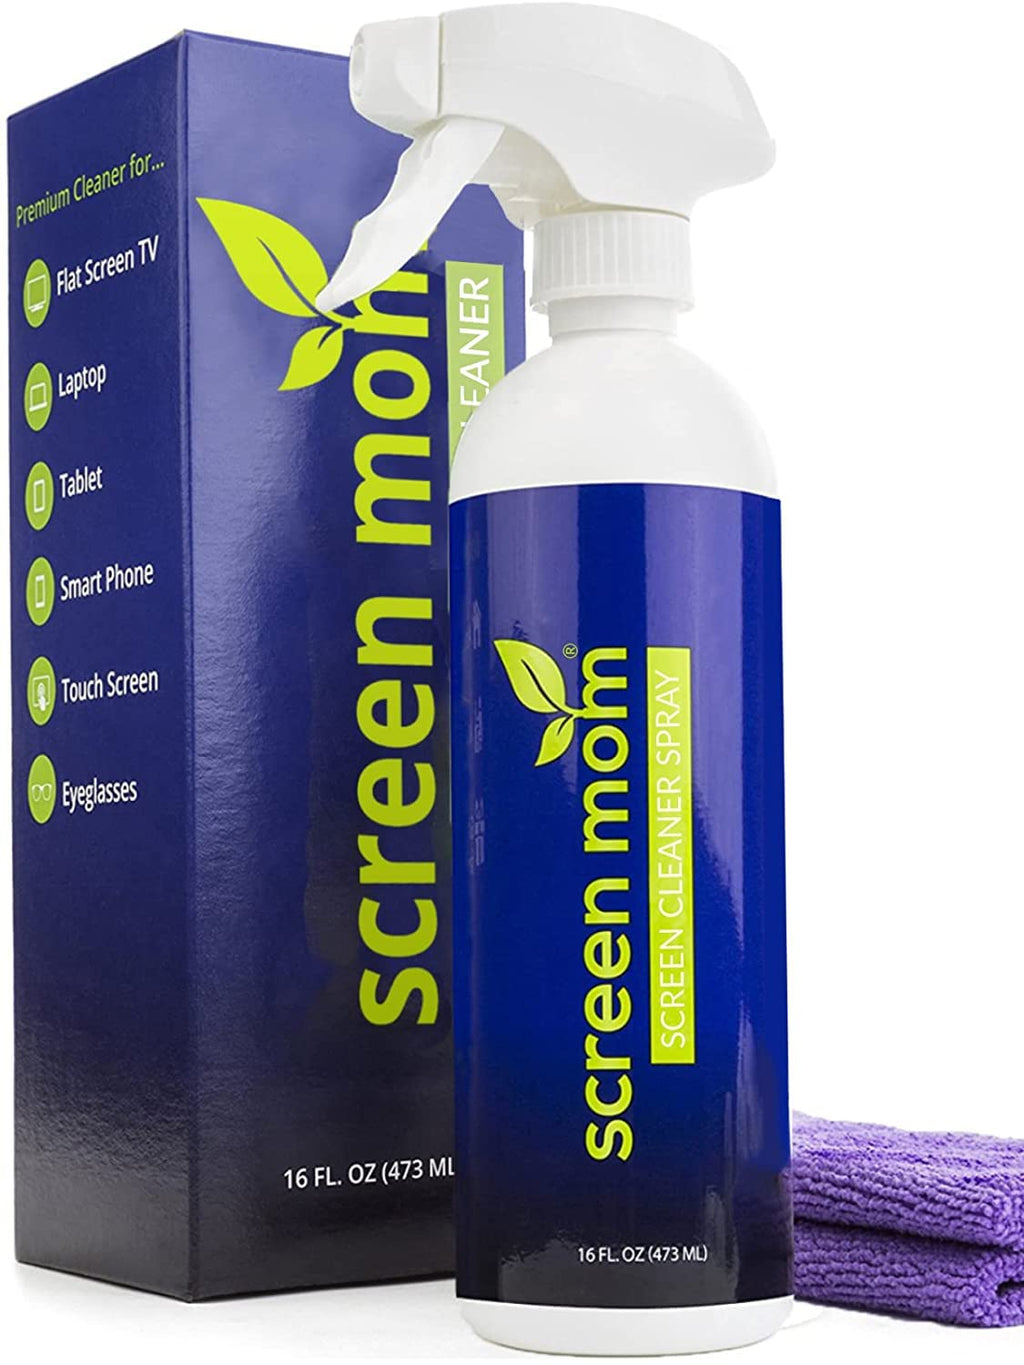  [AUSTRALIA] - Screen Cleaner Kit - Best for LED & LCD TV, Computer Monitor, Laptop, and iPad Screens – Contains Over 1,572 Sprays in each Large 16 ounce Bottle – includes Premium Microfiber Cloth